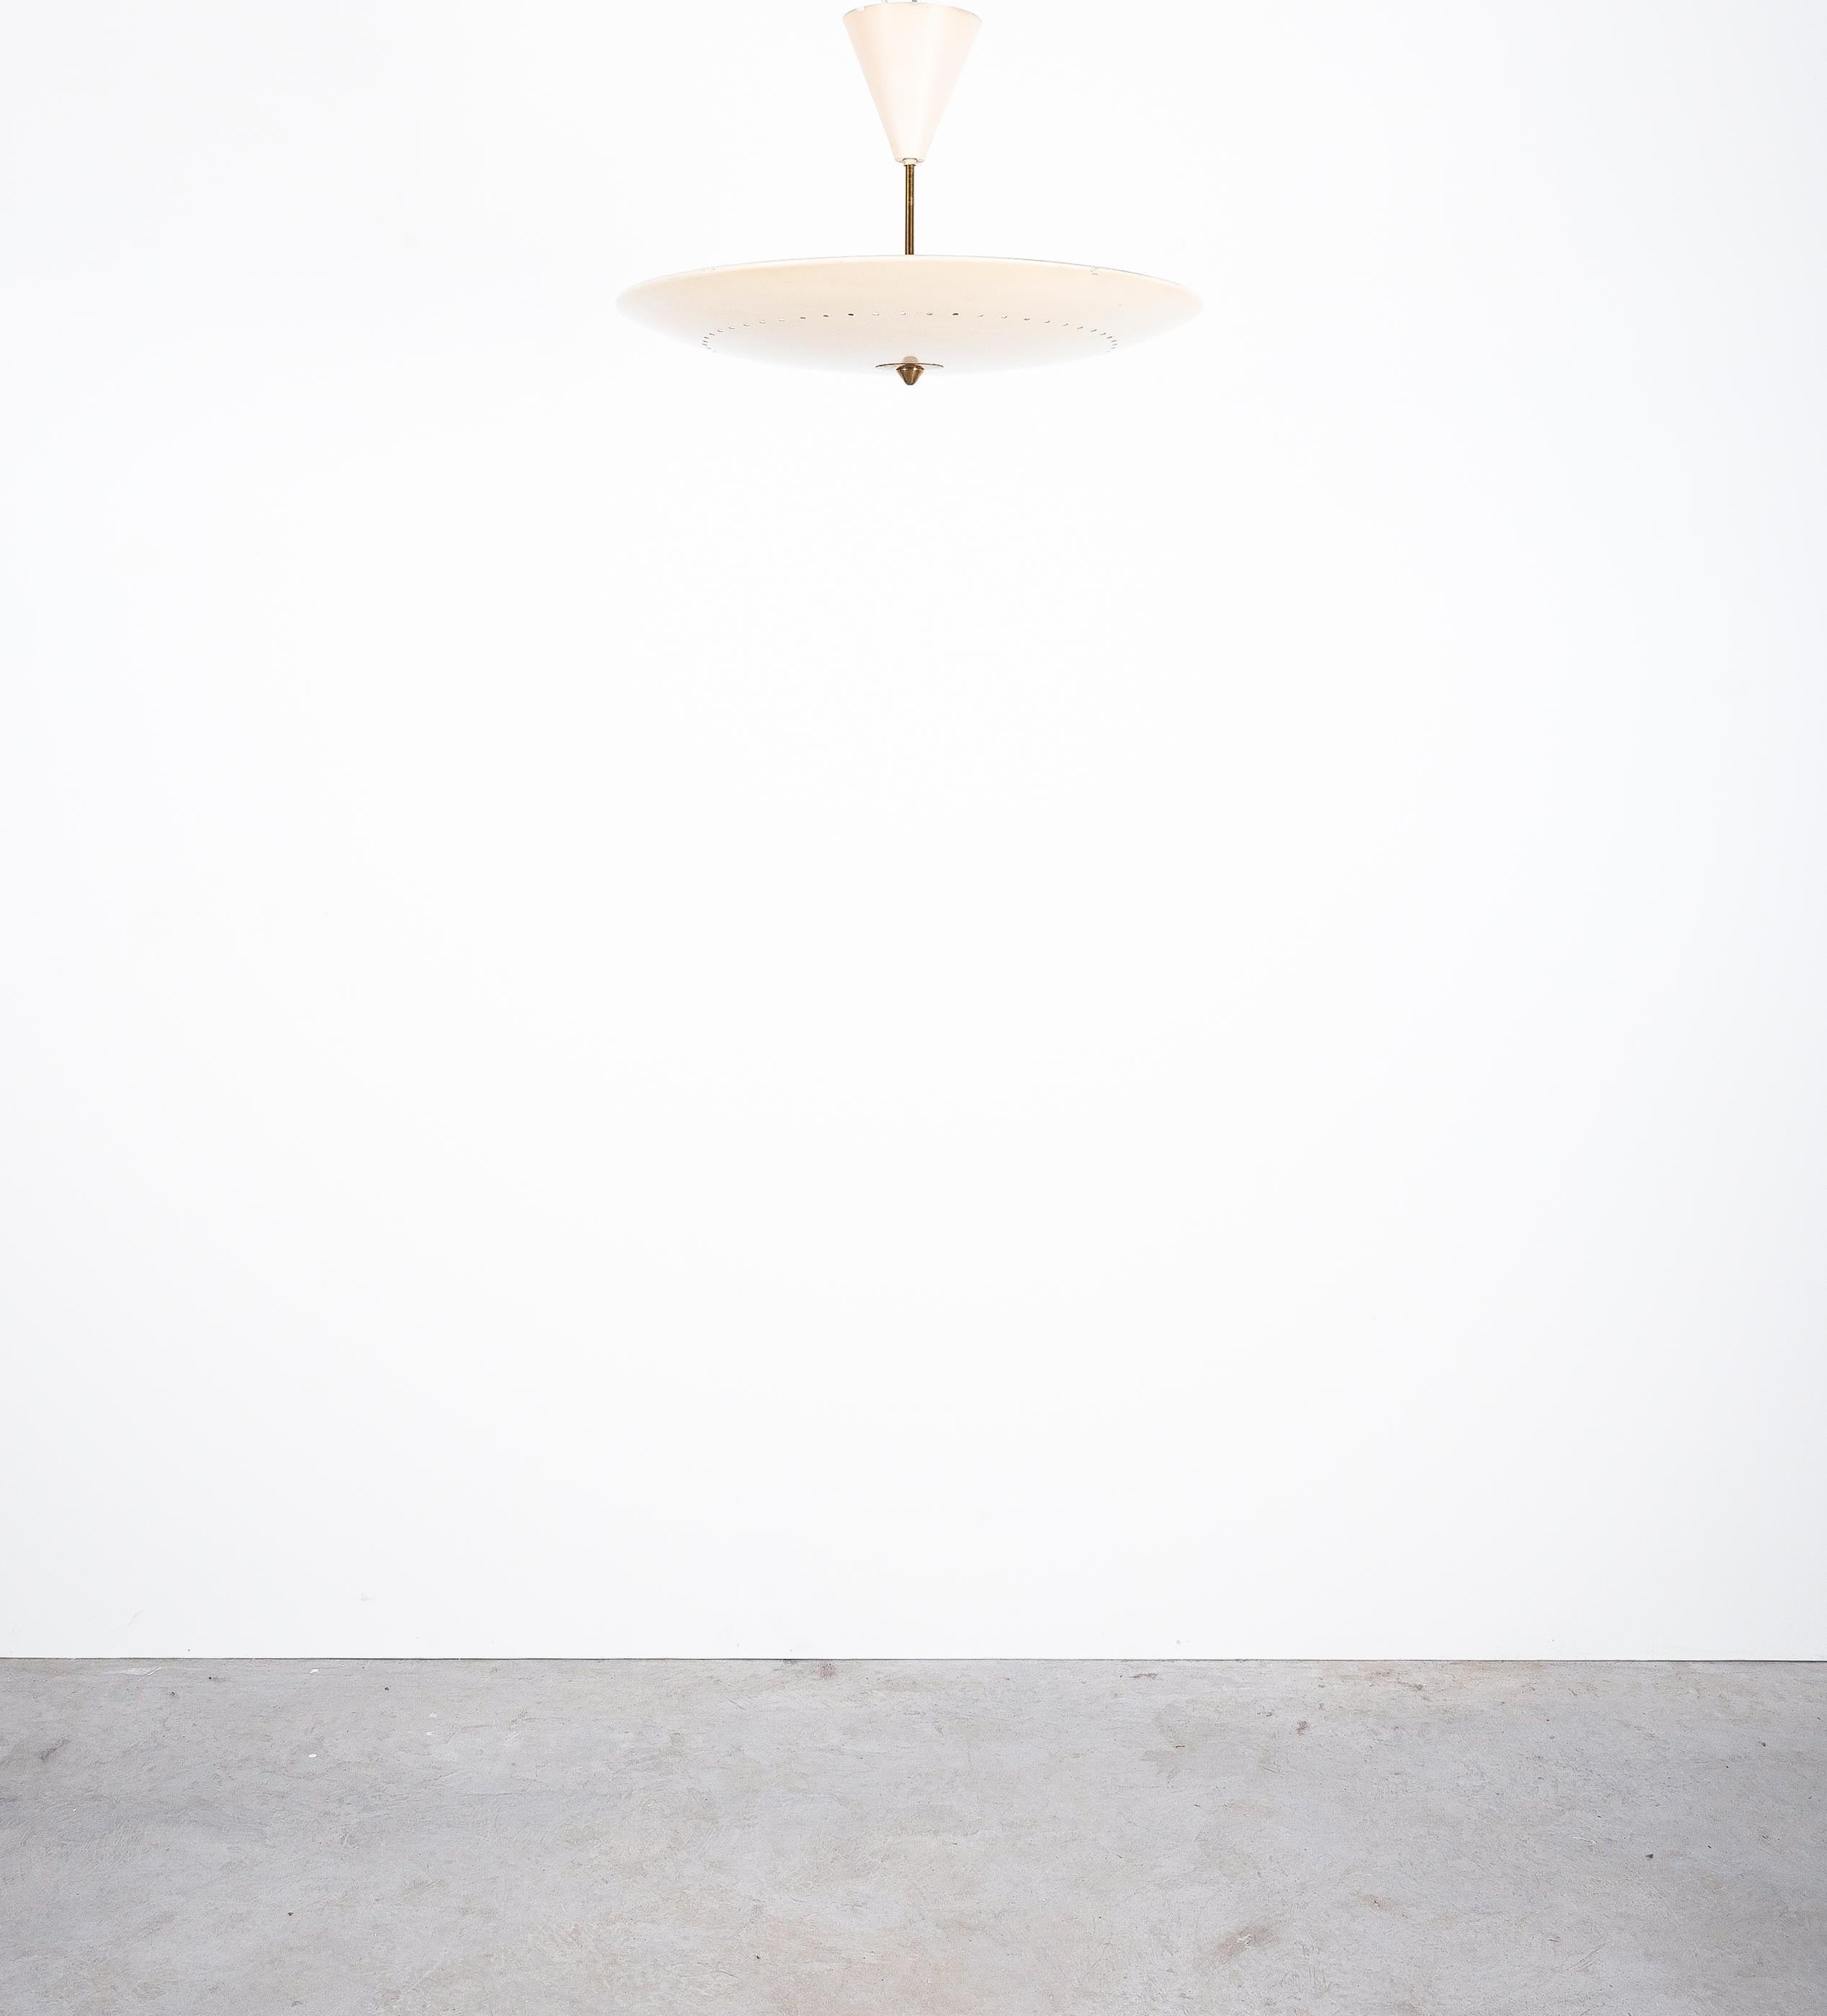 Gino Sarfatti Arteluce 2031 ceiling lamp or semi flush mount, Italy, 1950. 

Rare version of a white aluminum light with brass accents in original condition (good condition with signs of wear). Five e27 (EU) or e26 (US) bulbs are used with this